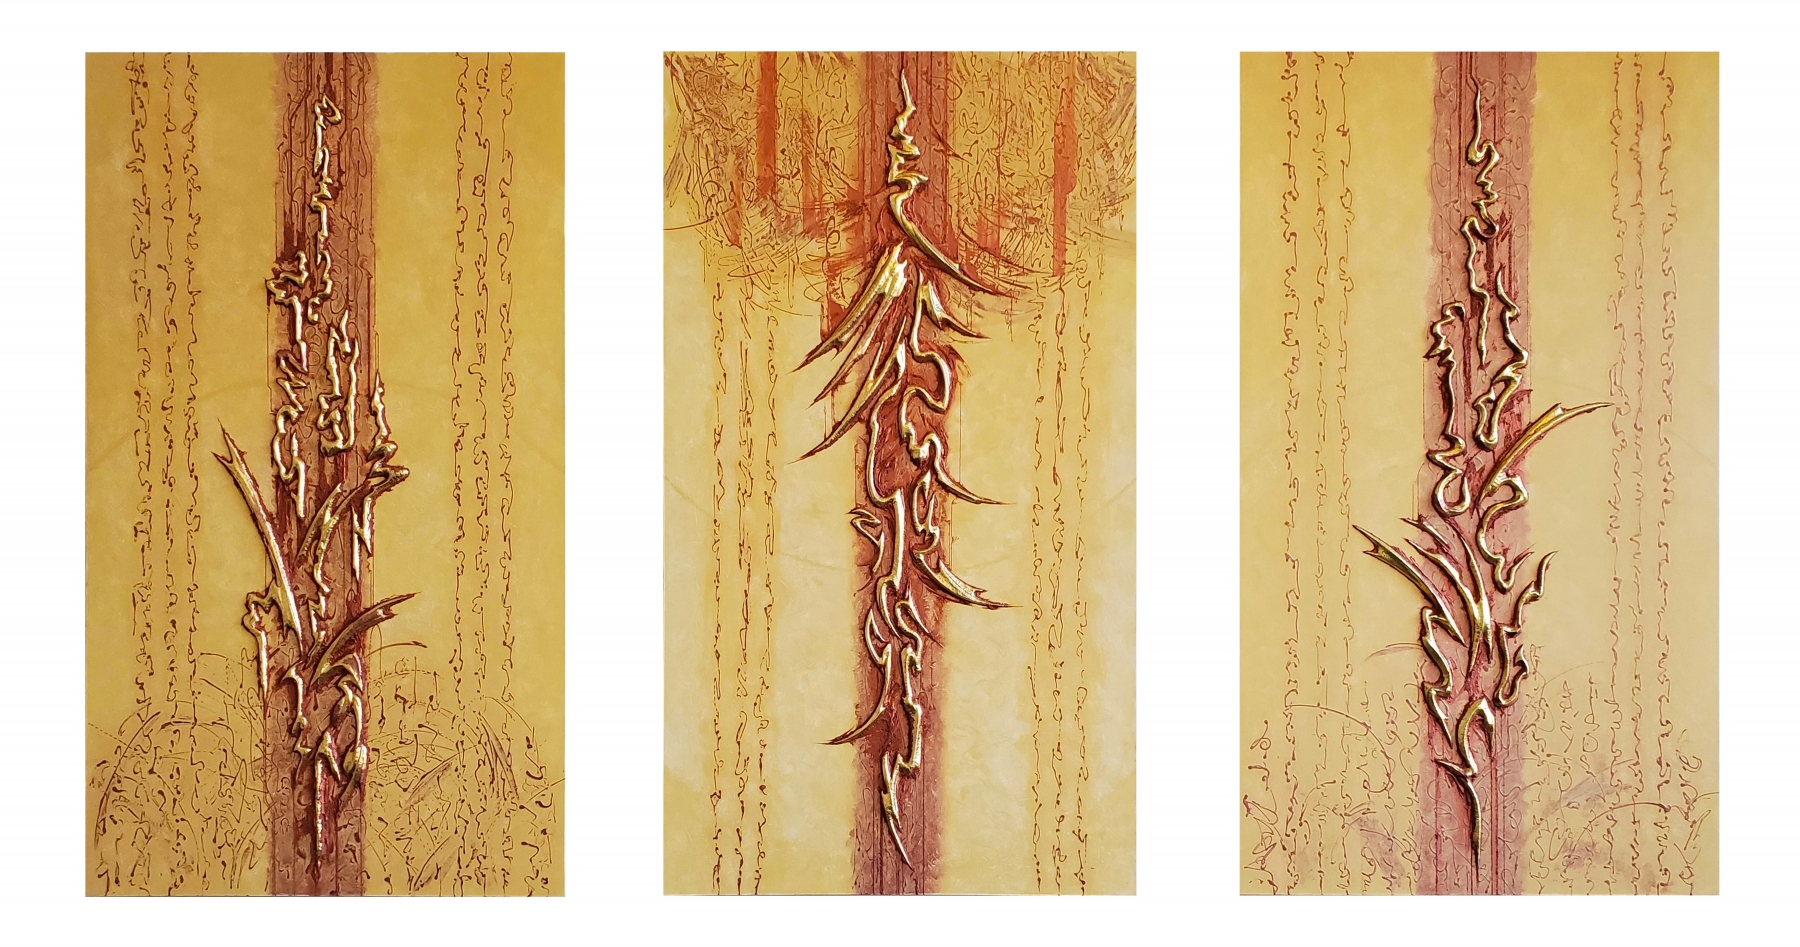 Canto Helios, Triptych  60" x 34" Each  Gilded Copper Repousse, Mineral Particles And Acrylic On Archival Wood Panel